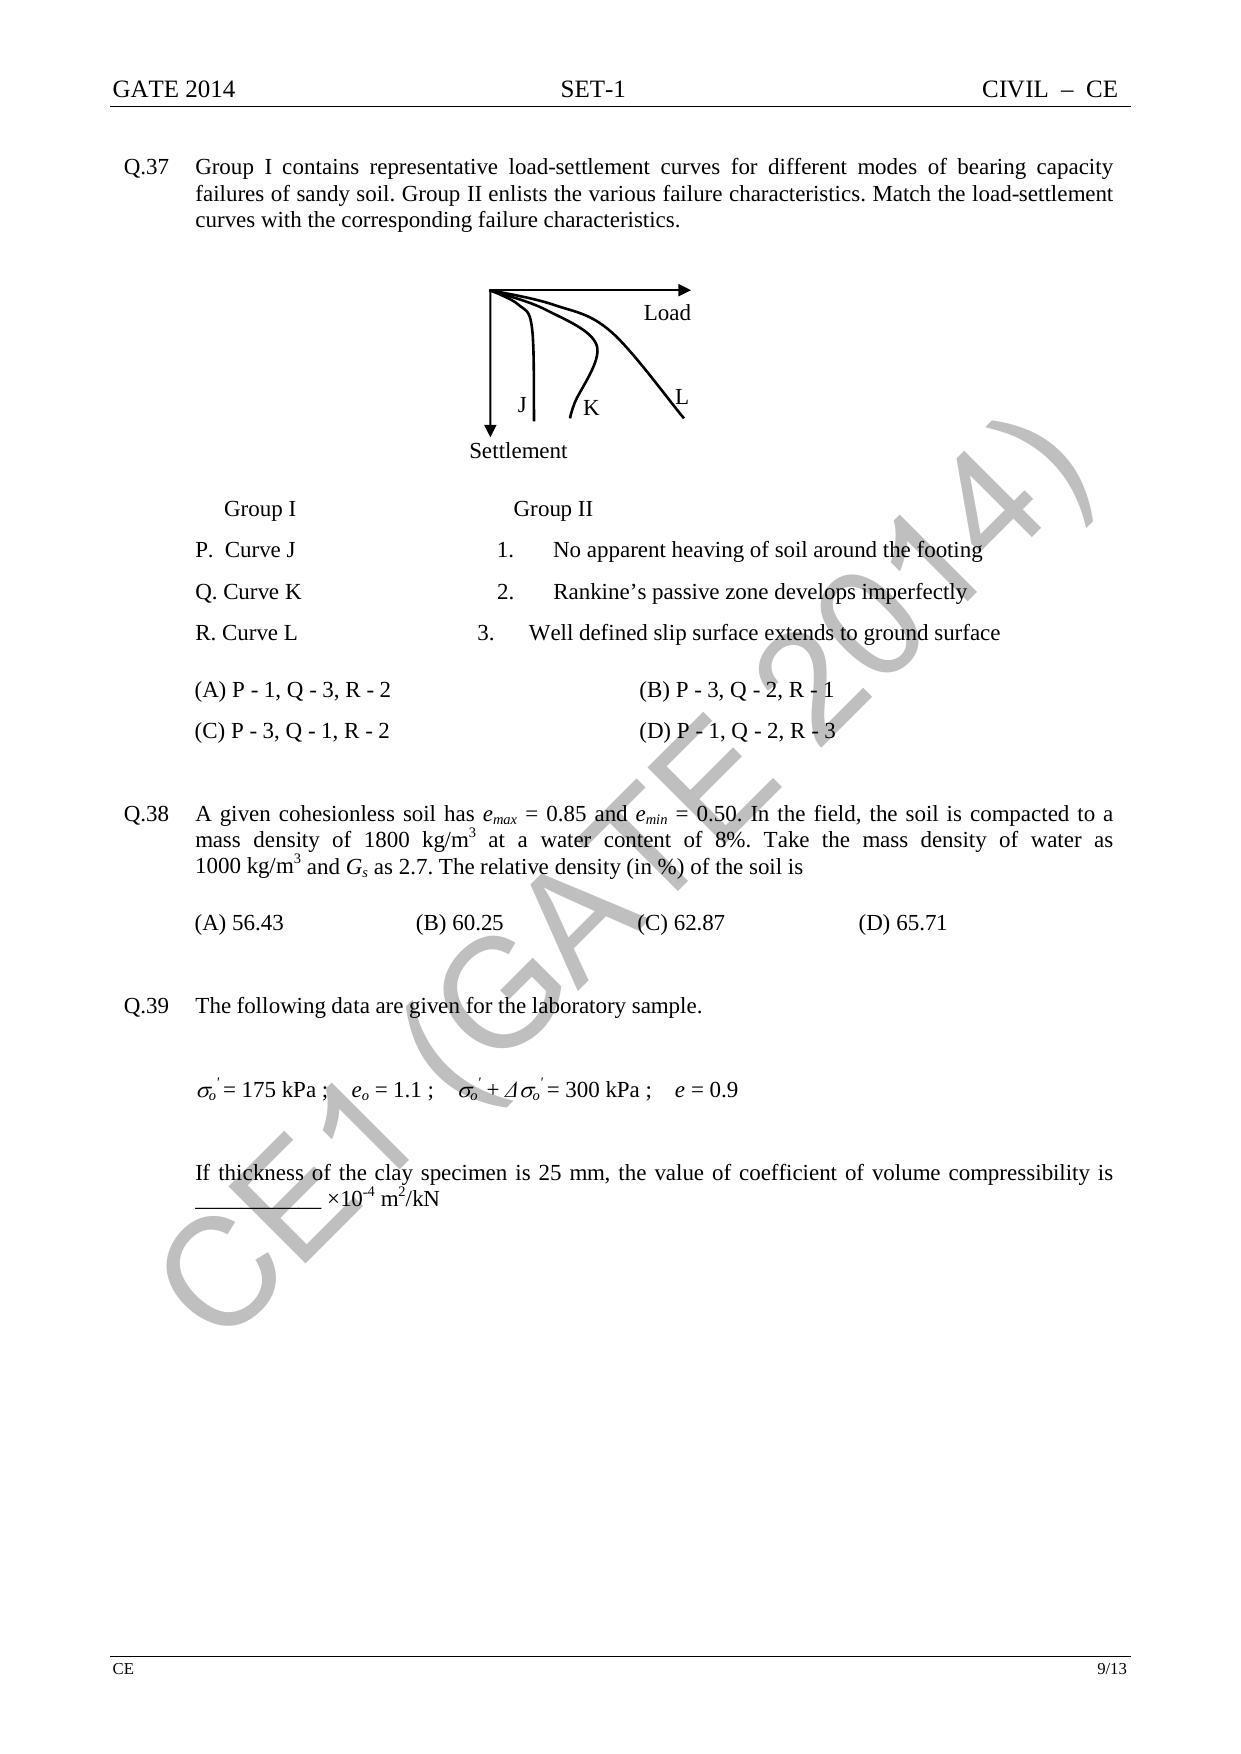 GATE 2014 Civil Engineering (CE) Question Paper with Answer Key - Page 16